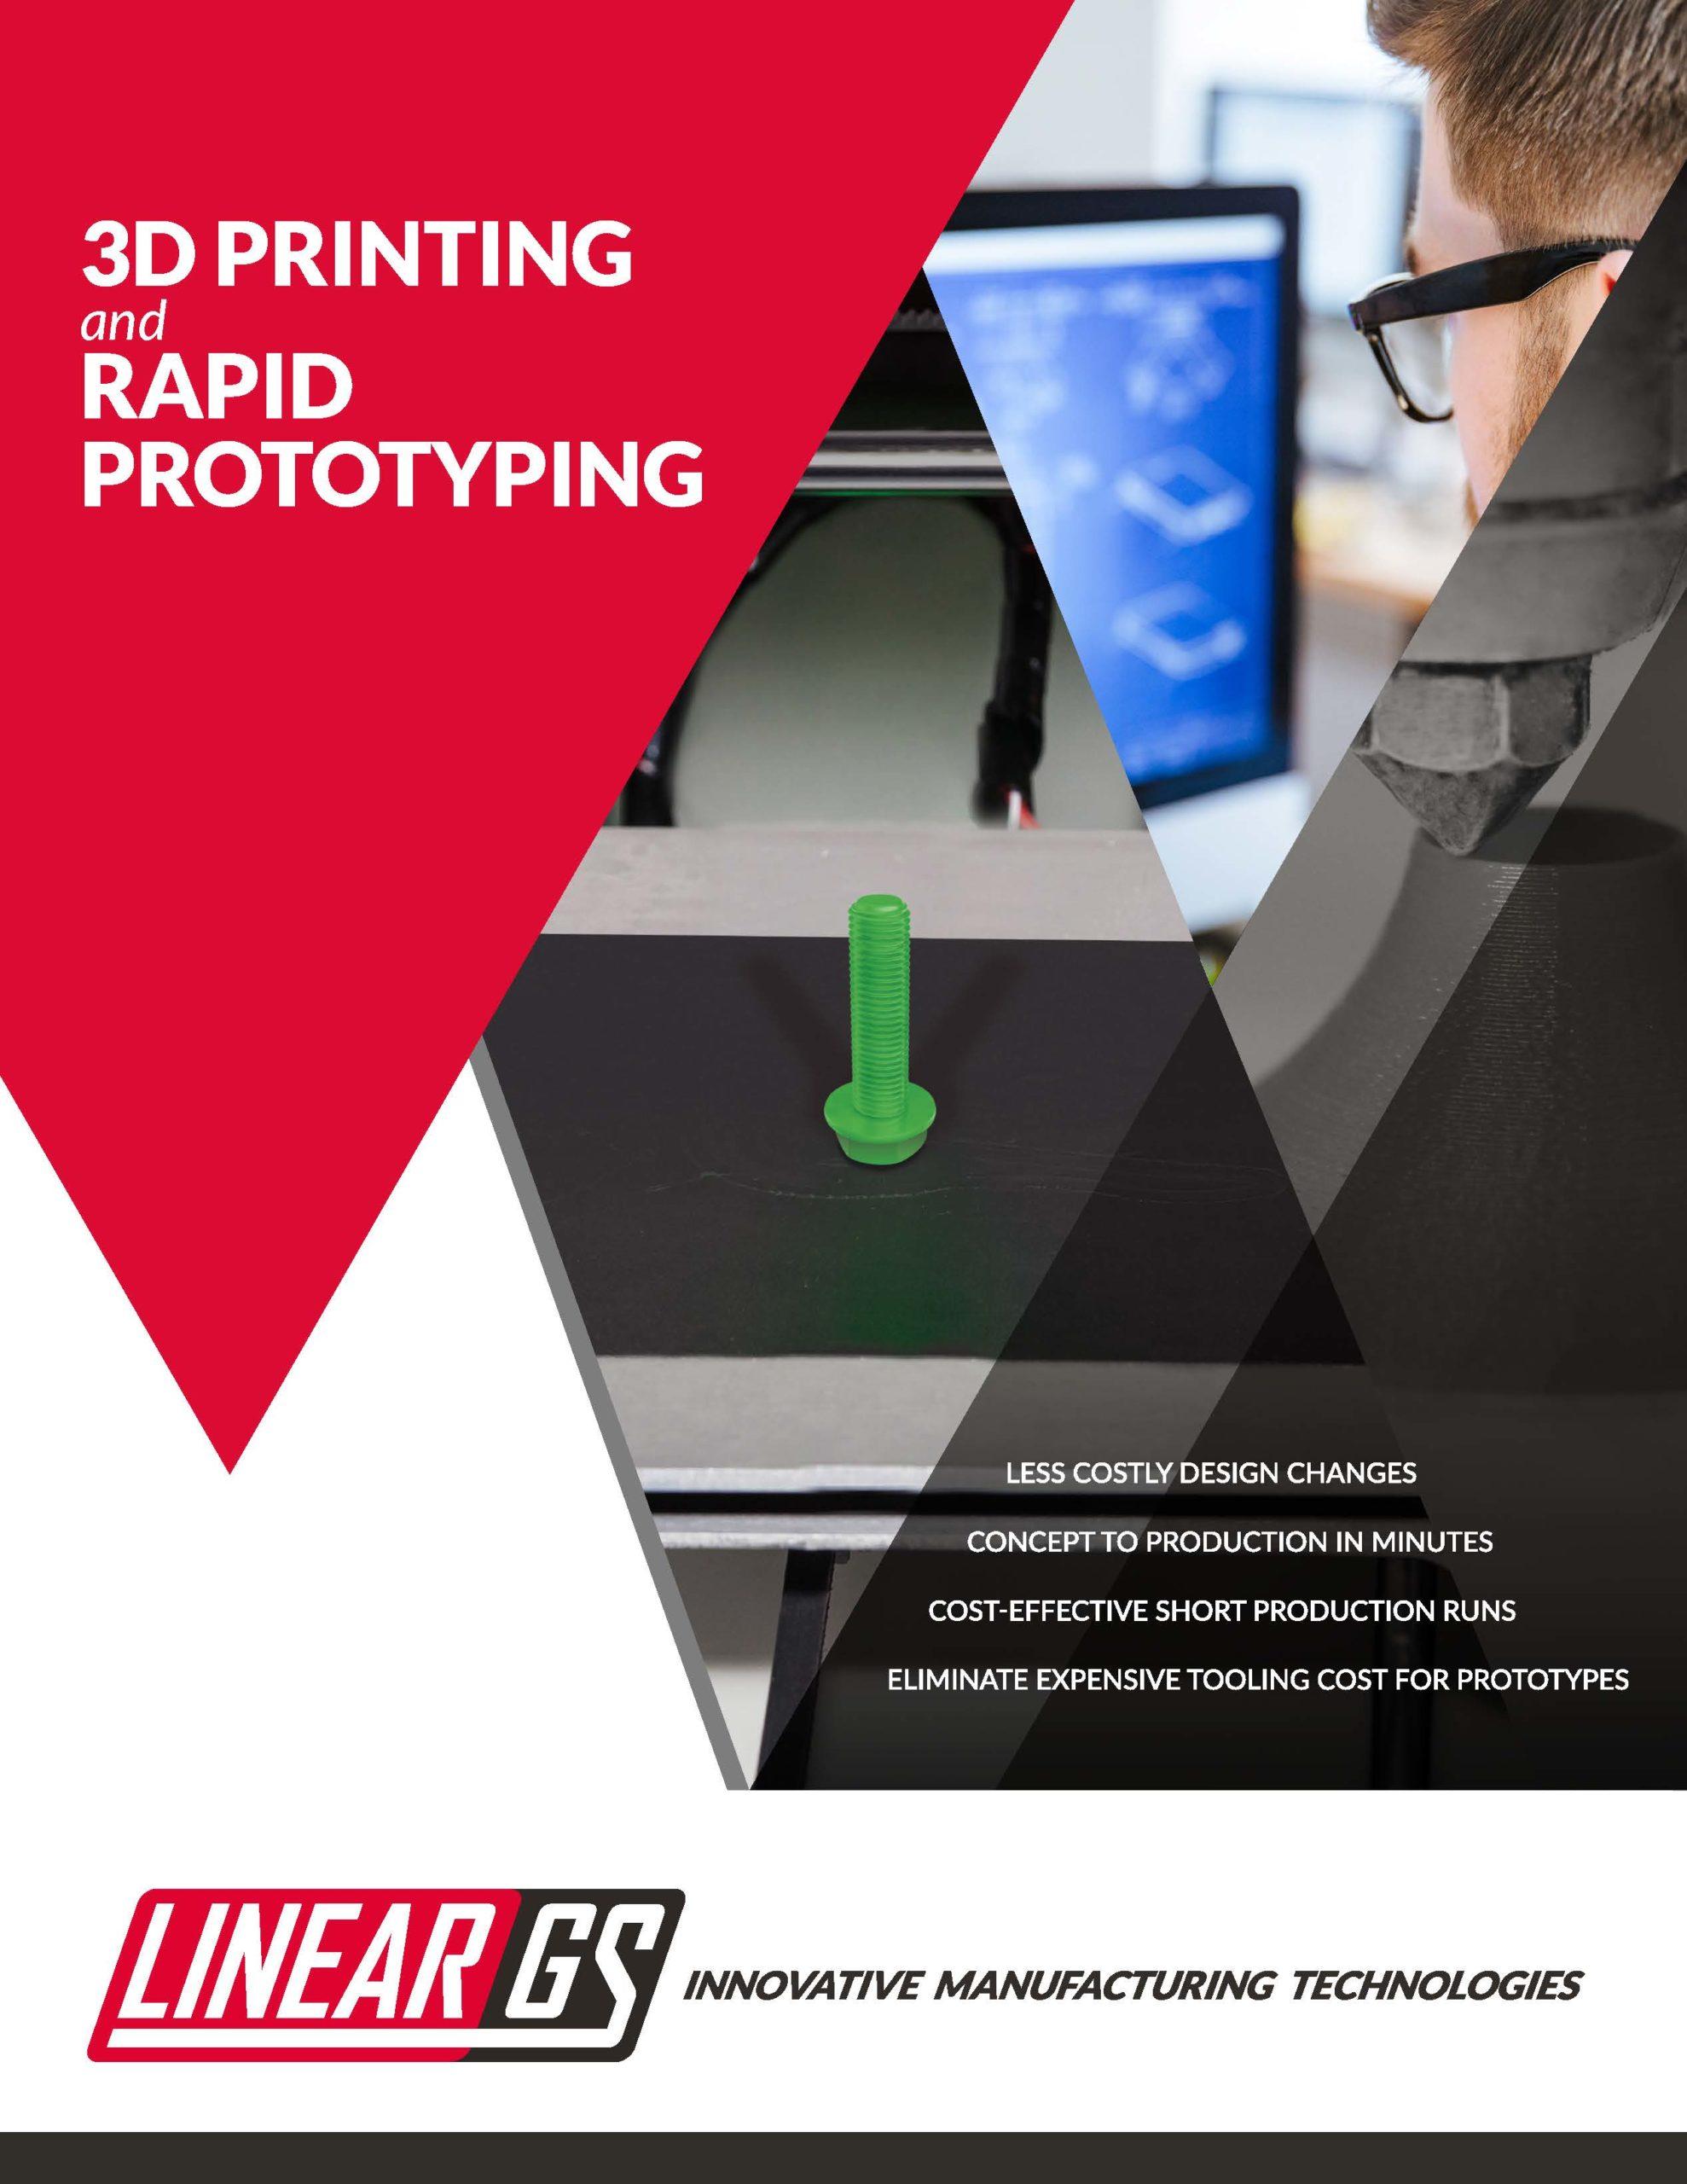 Image for 3D Printing & Rapid Prototyping - LinearGS